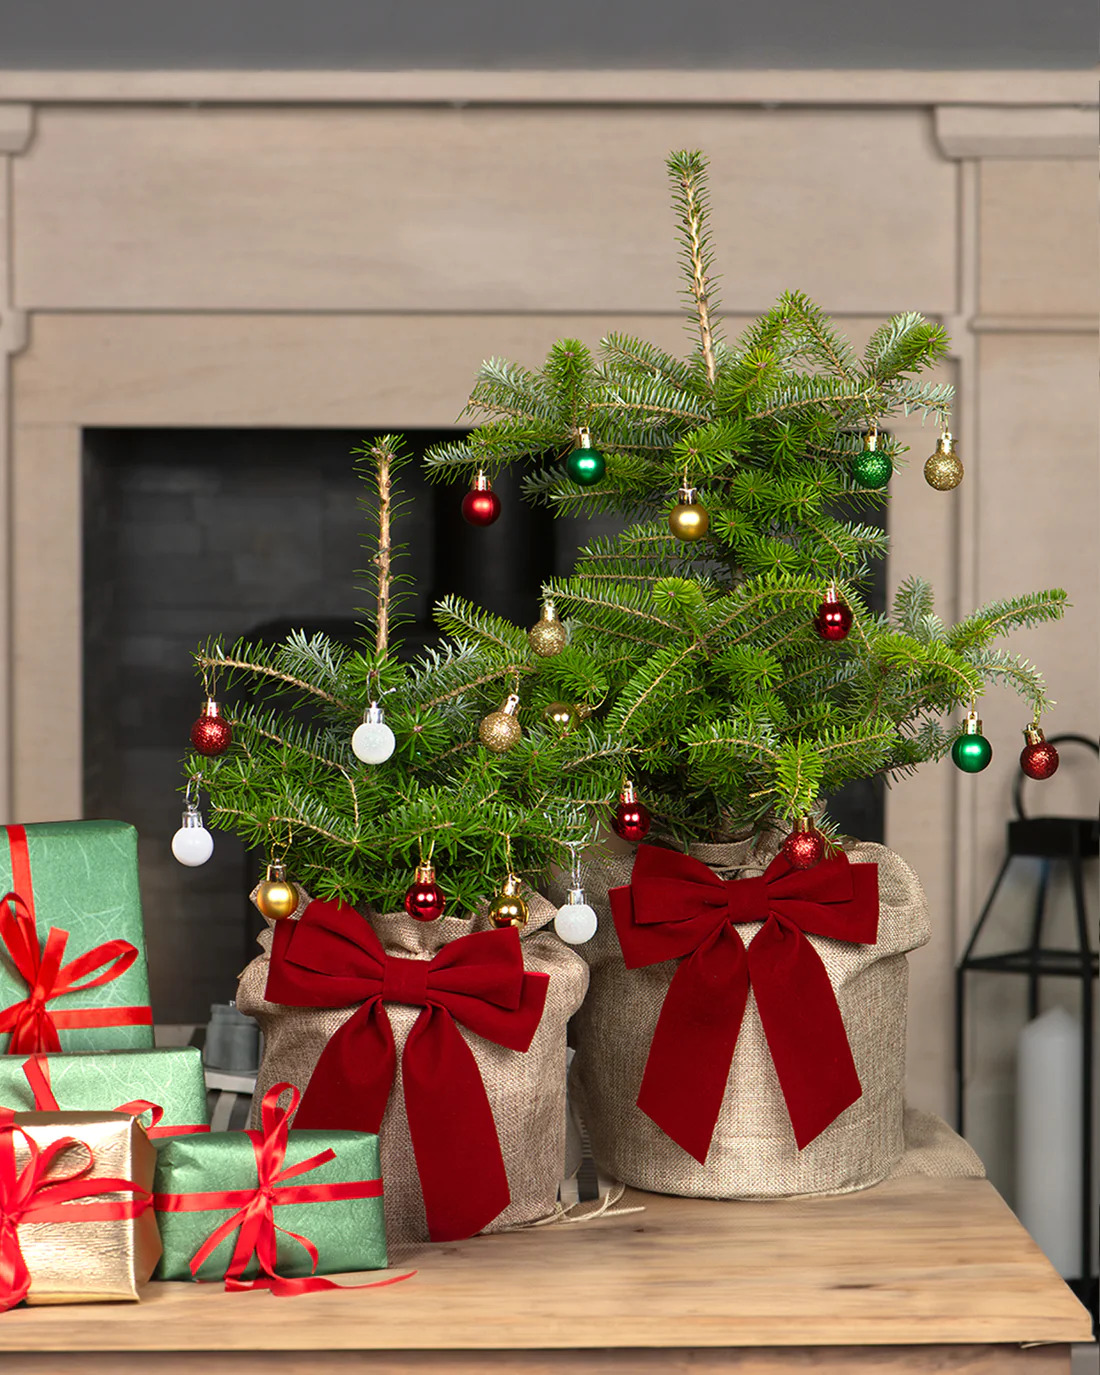 Potted Korean fir tree plants decorated for the Christmas season (Christmas Trees Direct)